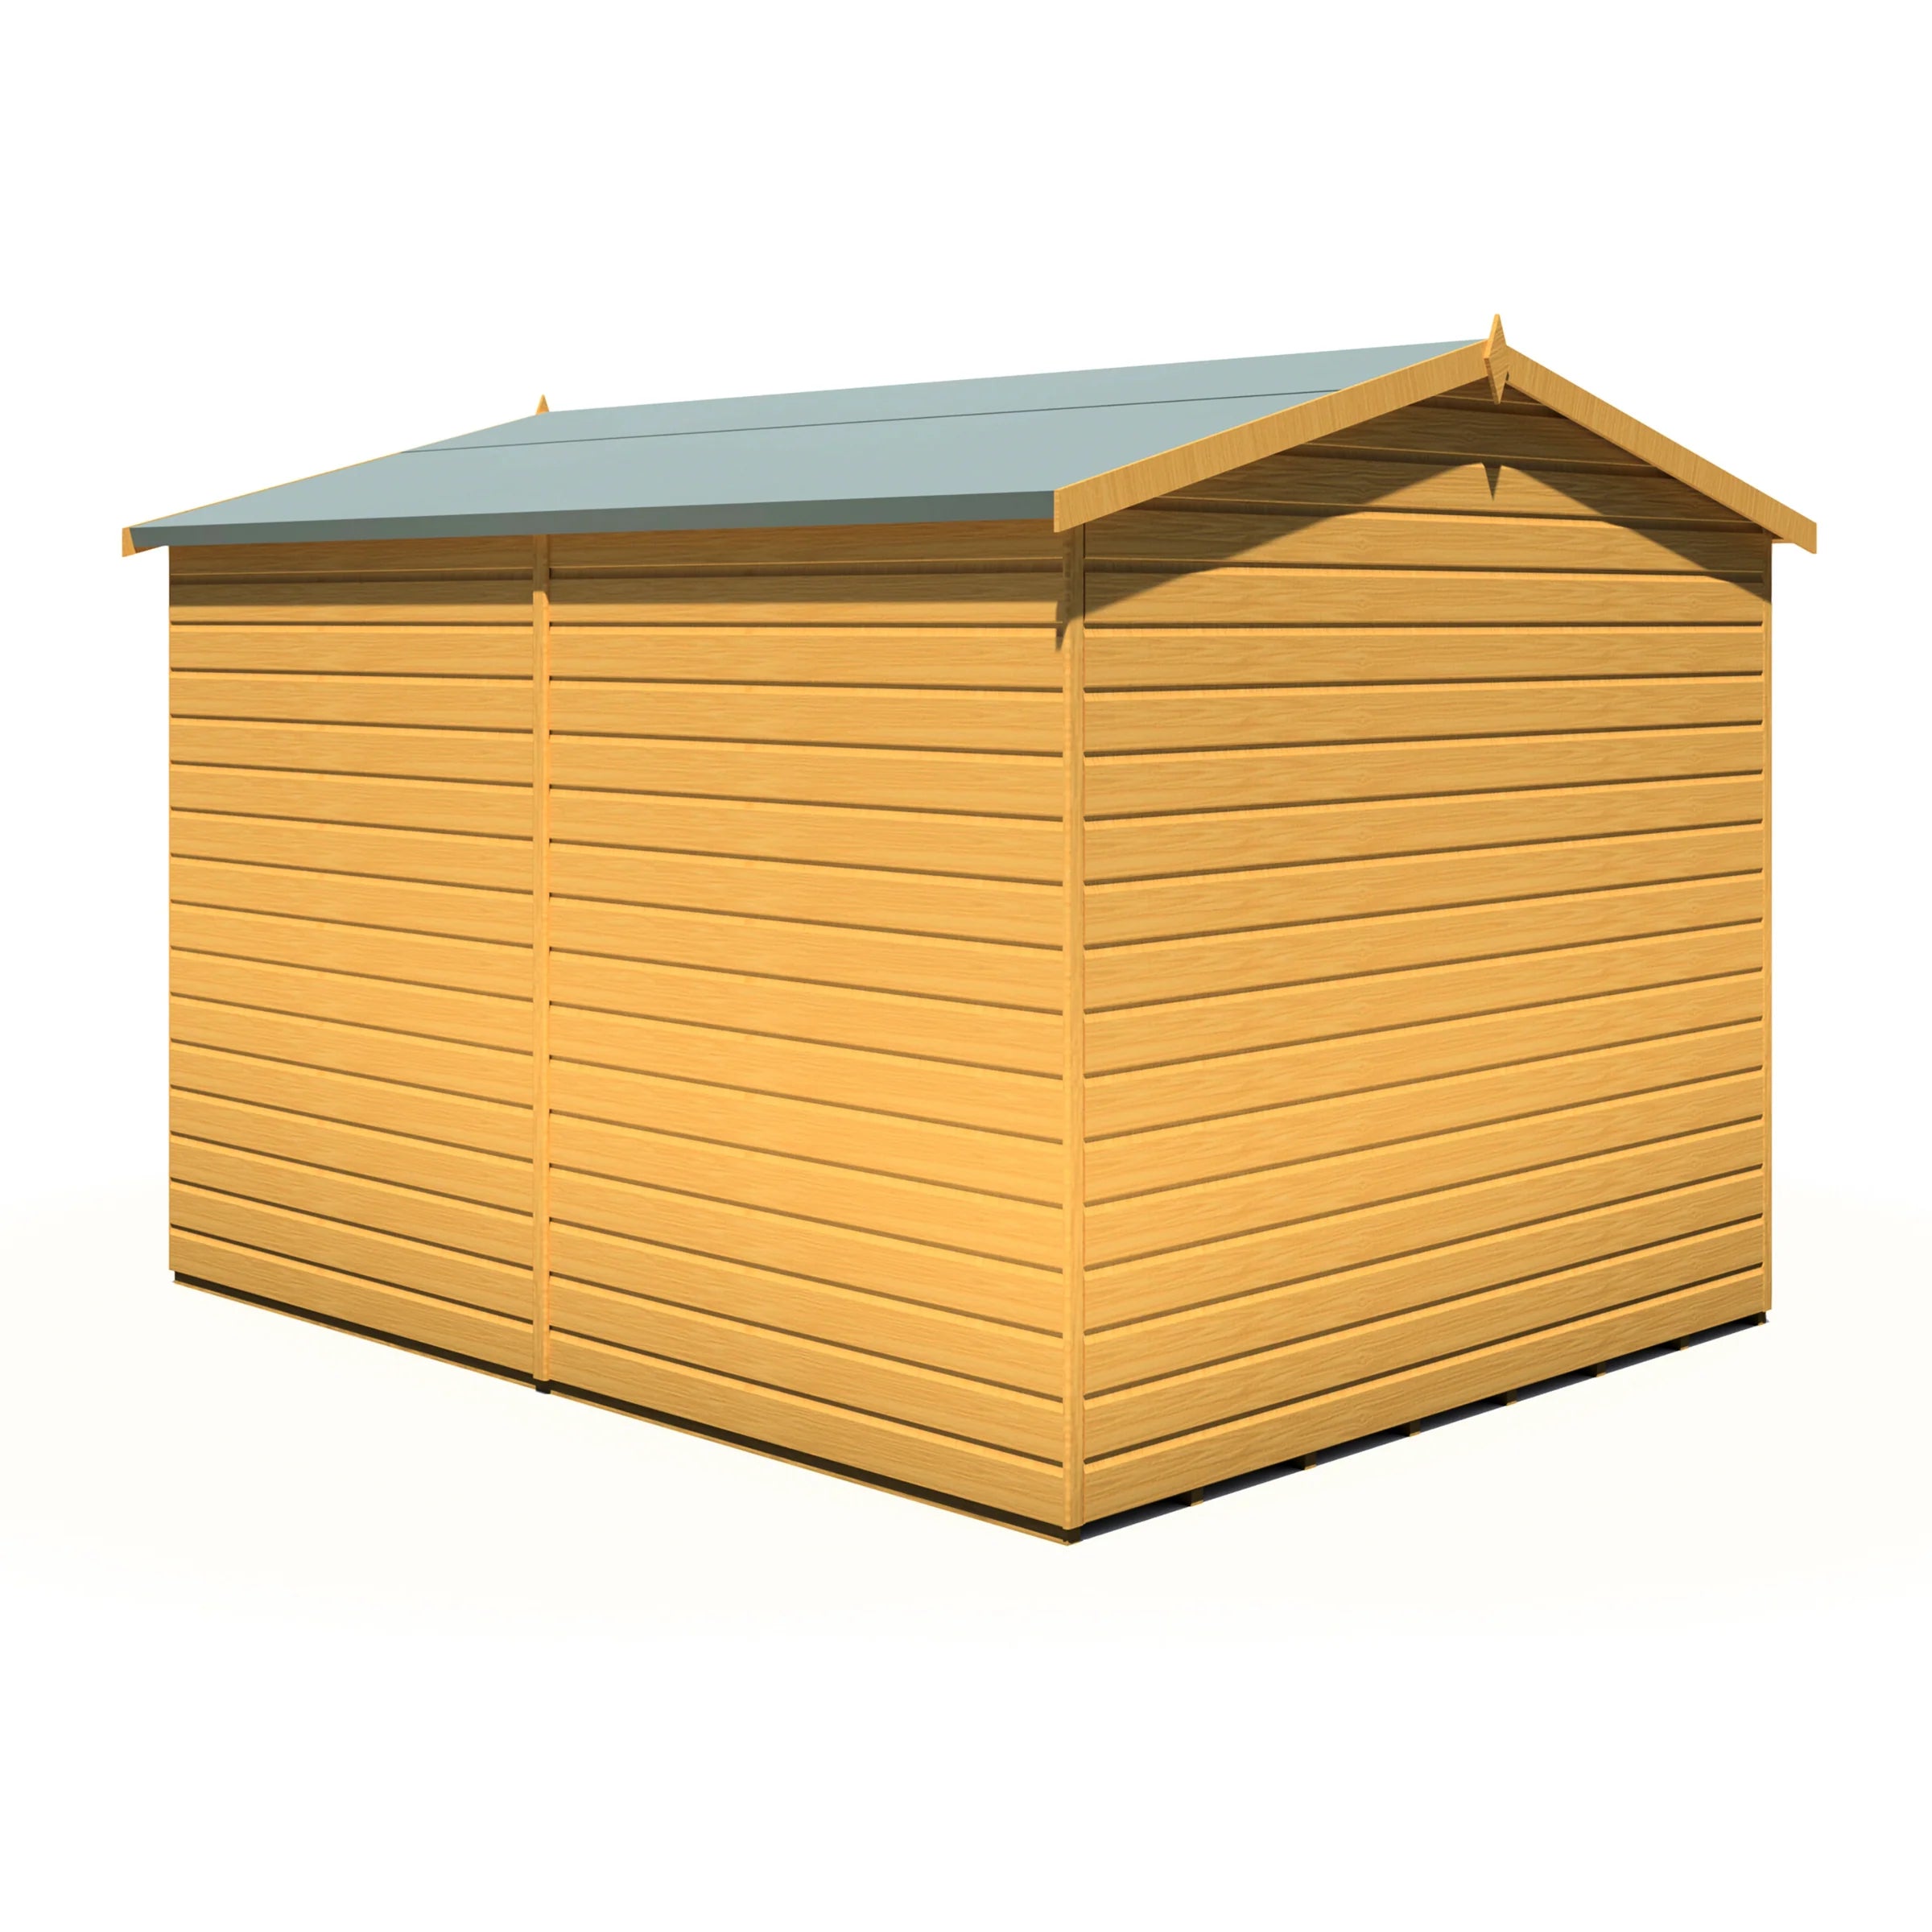 Shire Lewis Reverse Apex Style C Single Door Shed 10x8